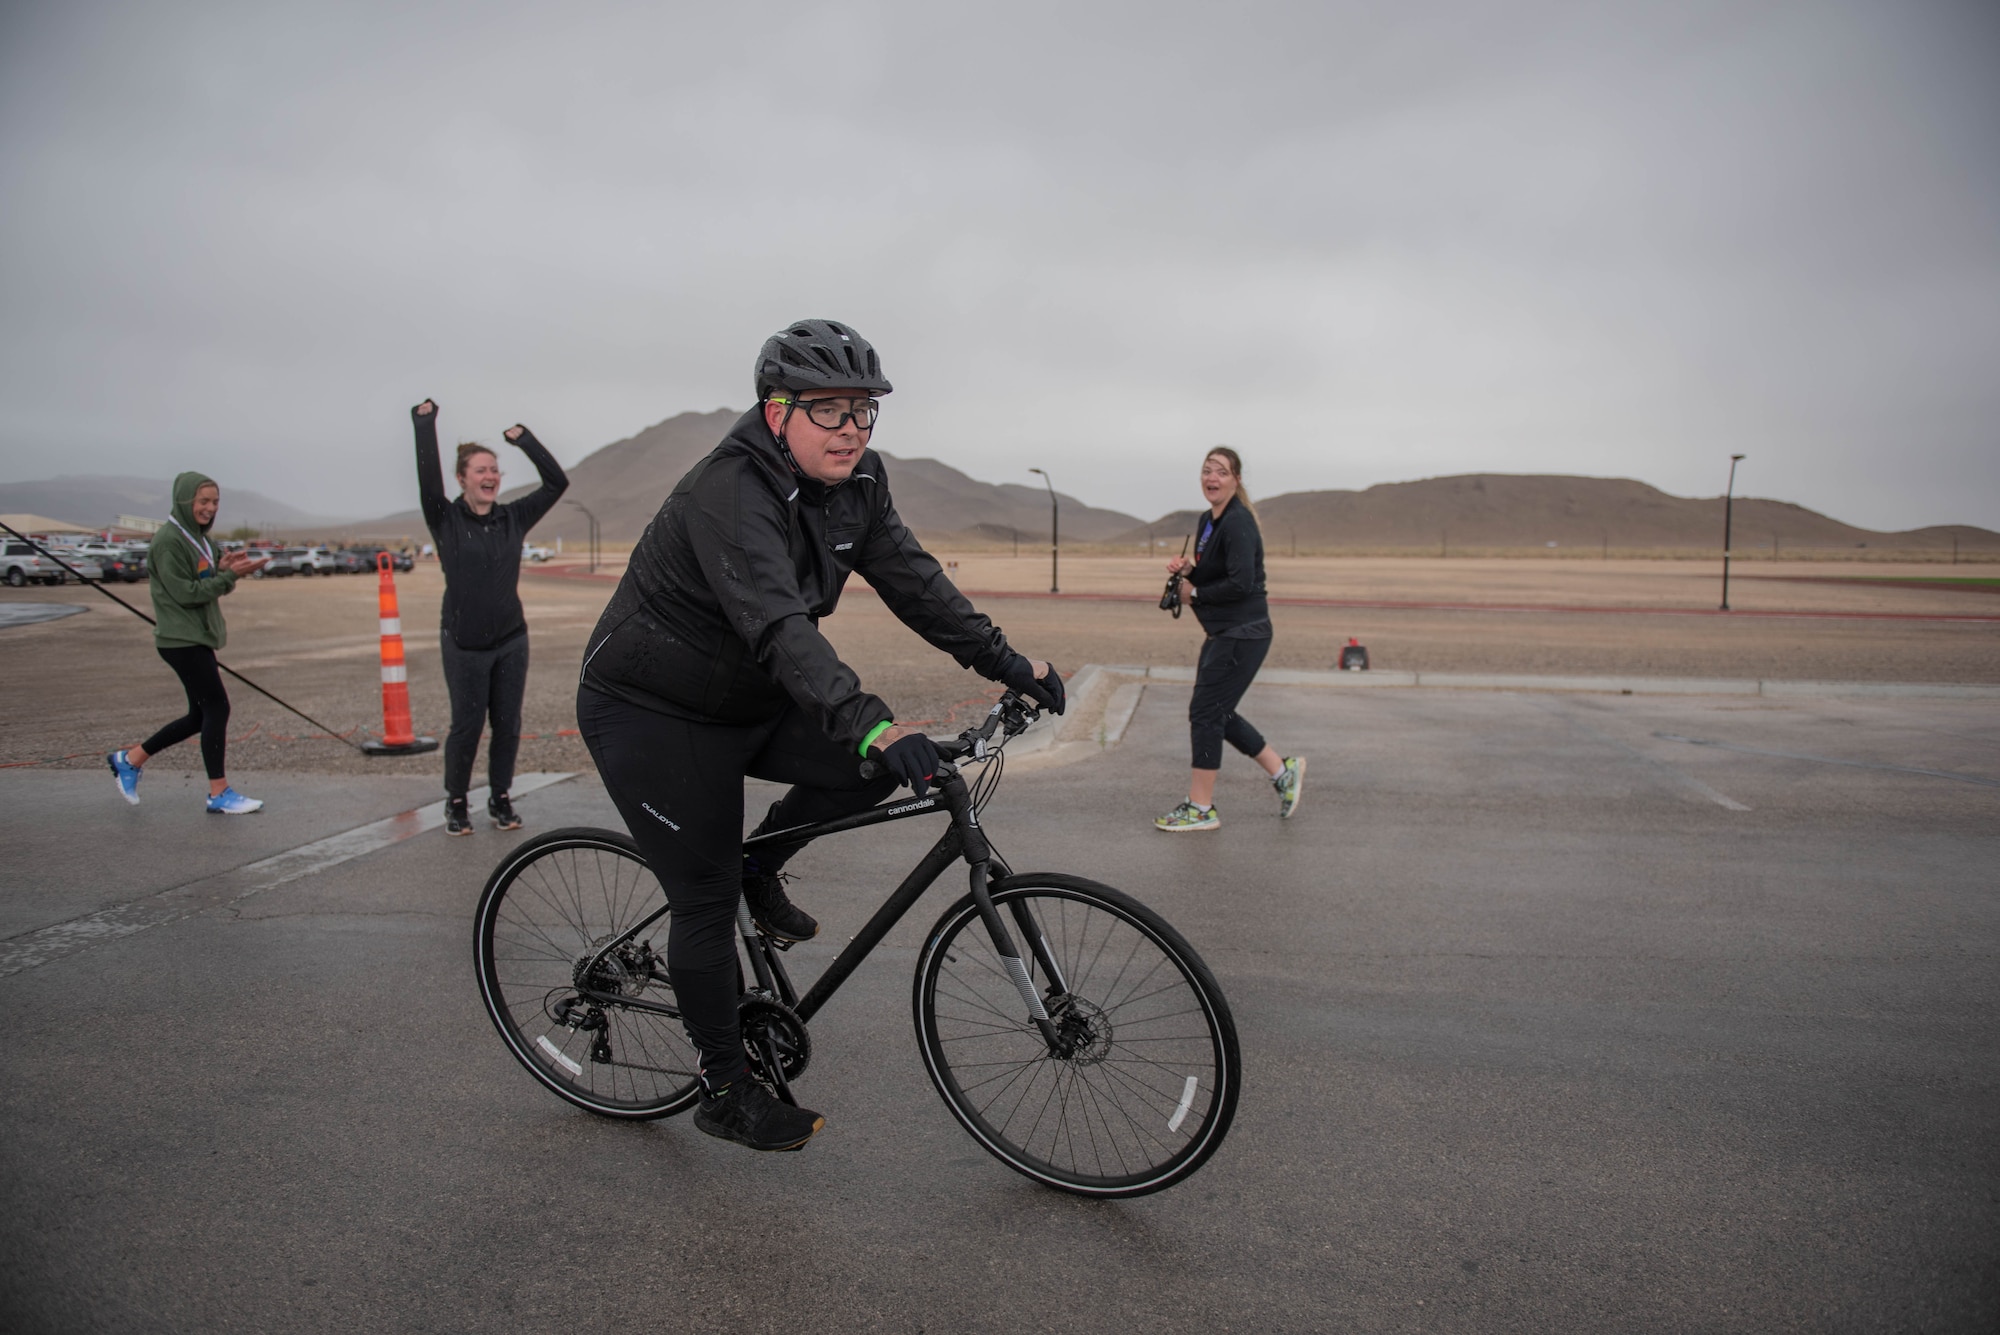 An airman rides past the finish line on a bike while more Airmen cheer him on.